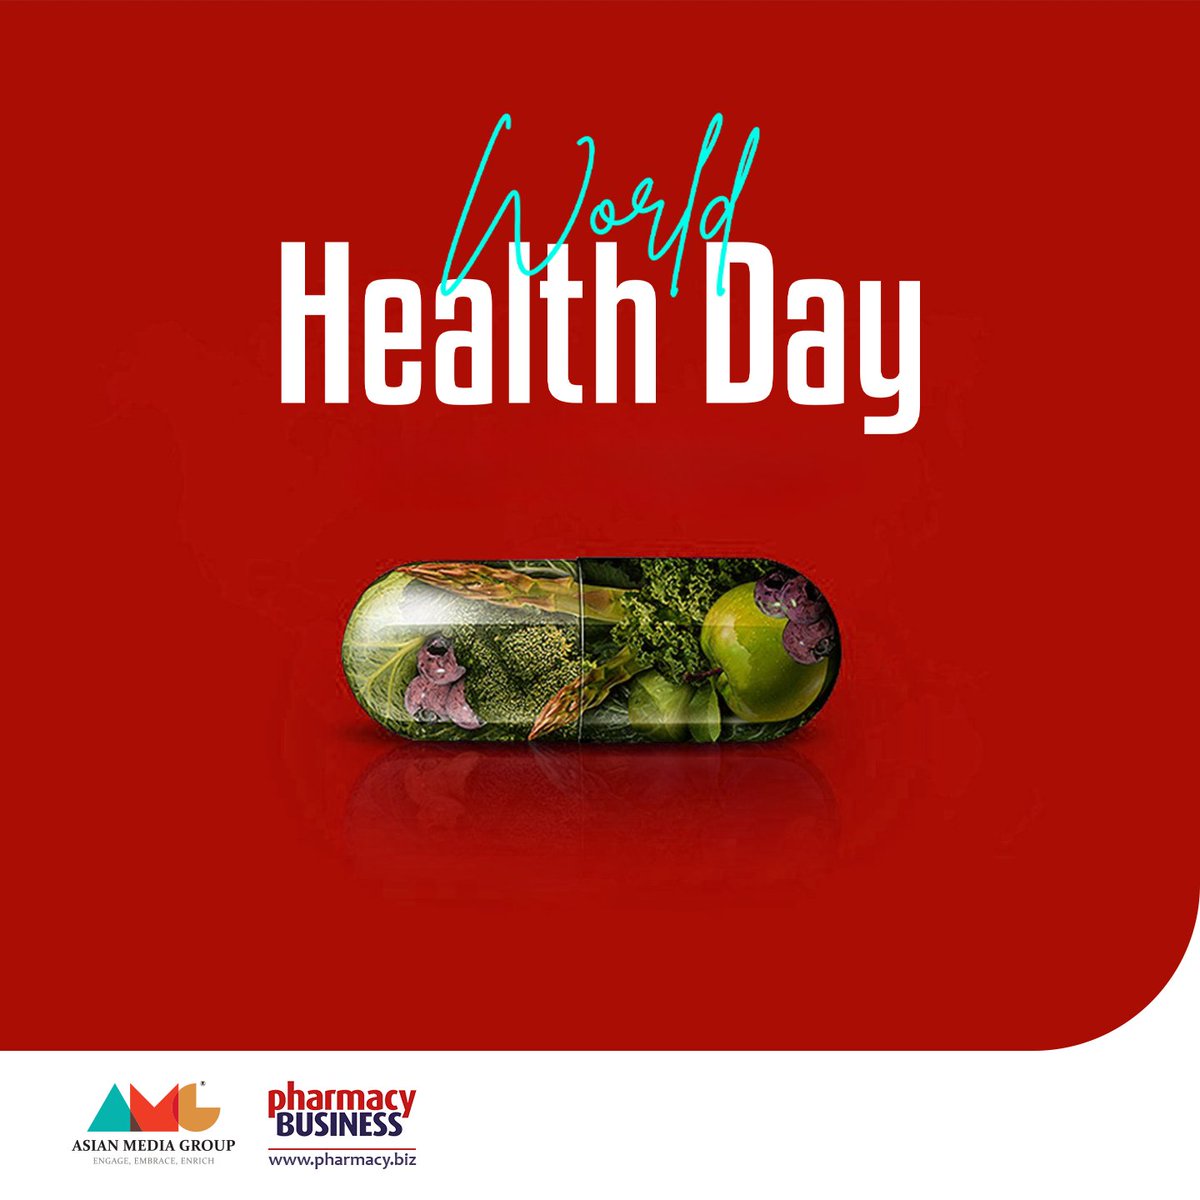 Sending you good vibes on #WorldHealthDay May you enjoy lifelong health, peace, and prosperity as you journey through life. Together, let's strive for a world where everyone has the chance to thrive in good health and happiness. Happy World Health Day! #PharmacyBusiness